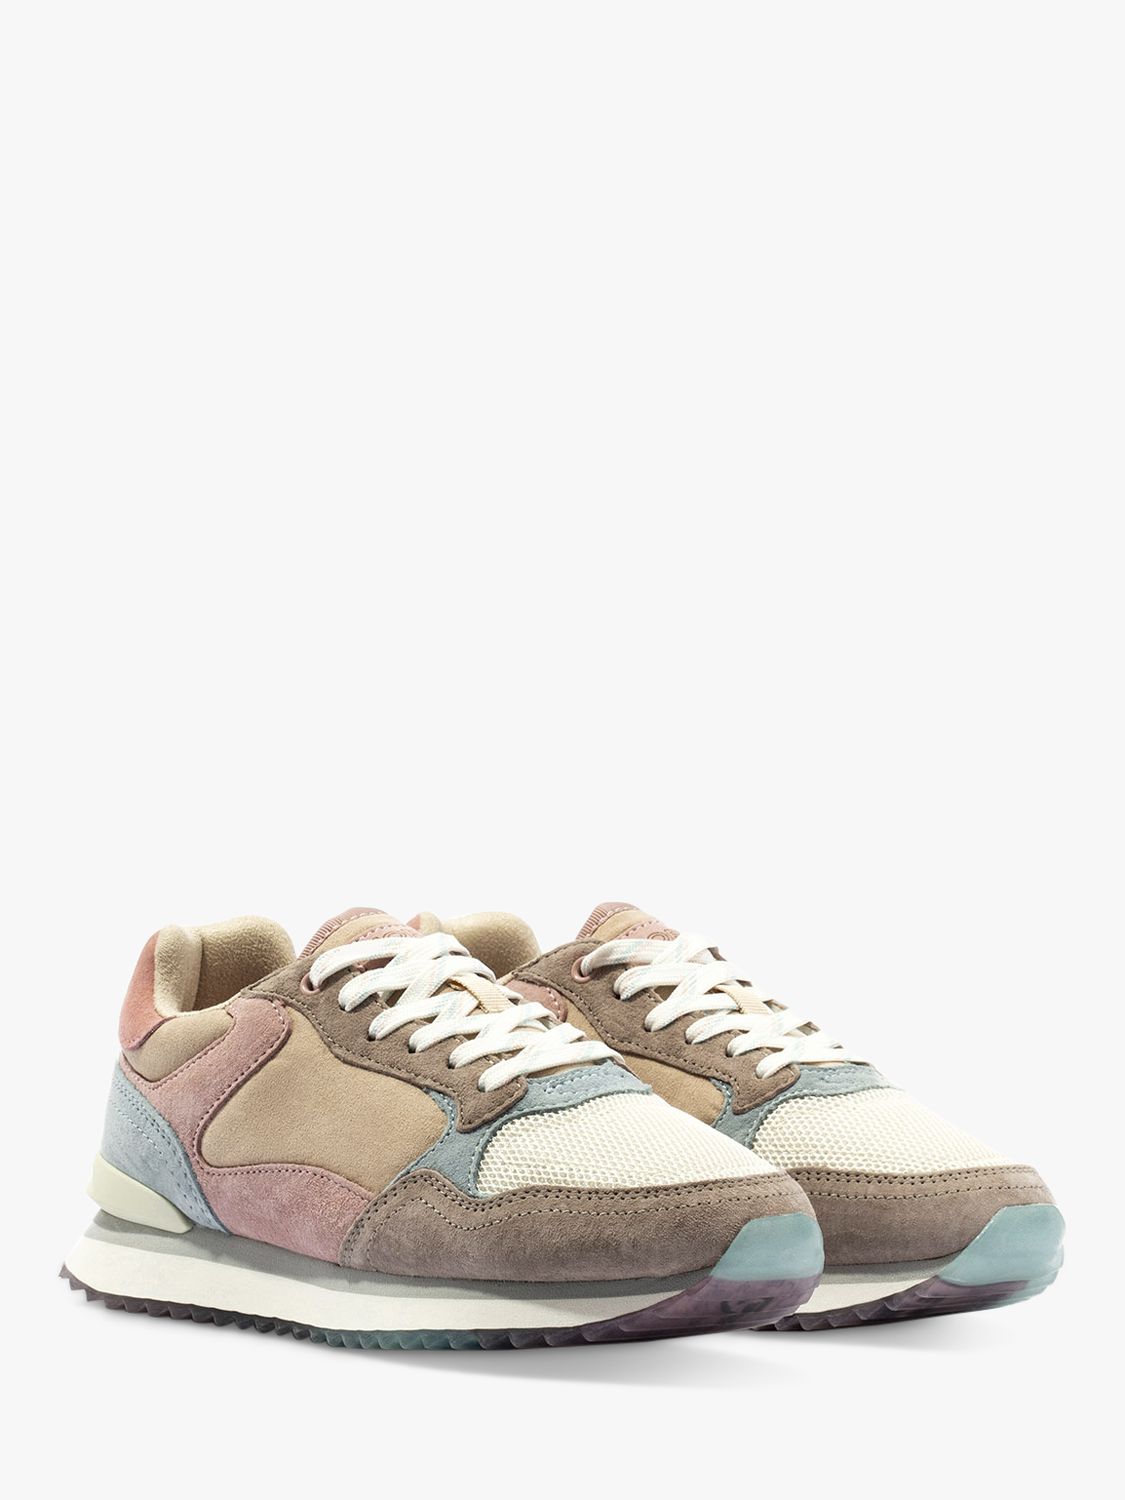 HOFF Barcelona Suede Lace Up Trainers, Multi at John Lewis & Partners